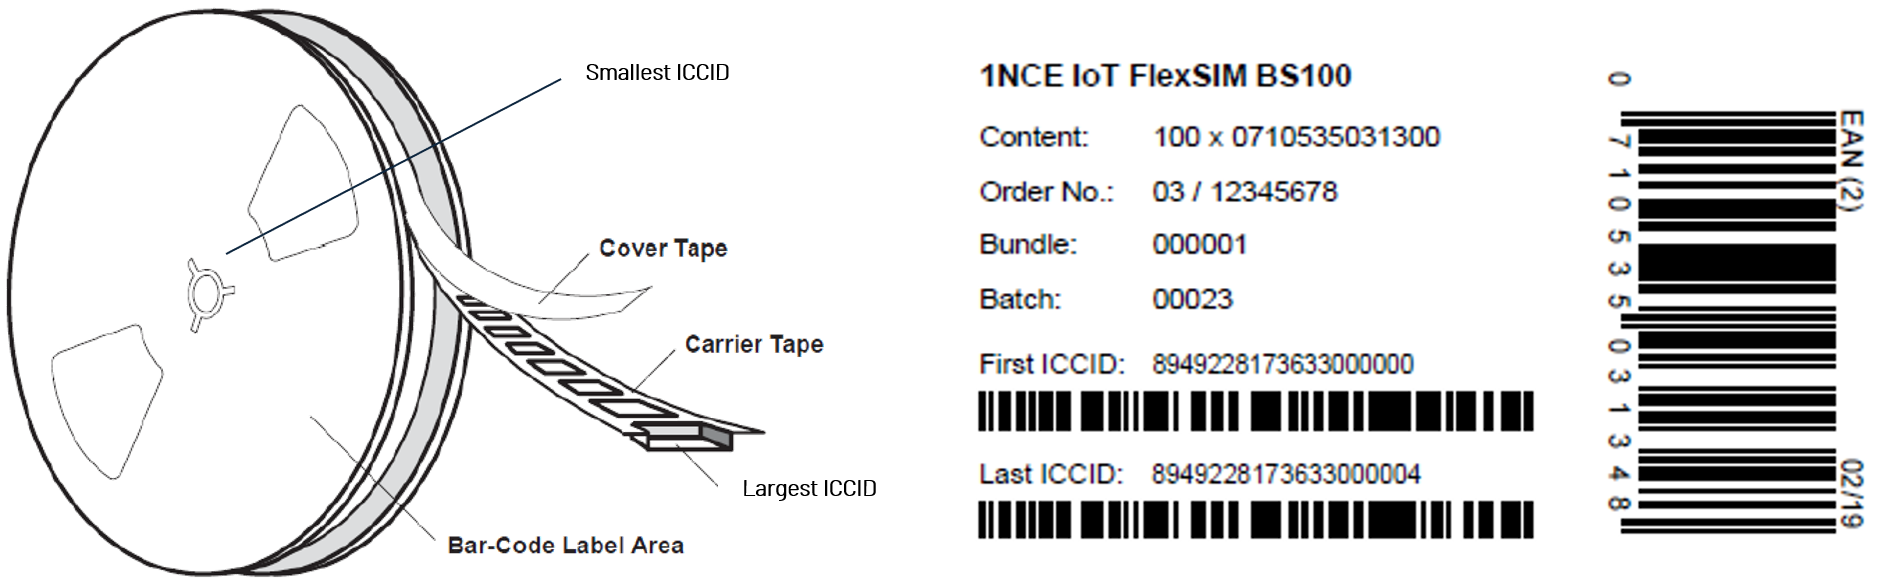 1NCE eSIM packaging reel and example barcode showing the first an last ICCID of the reel.